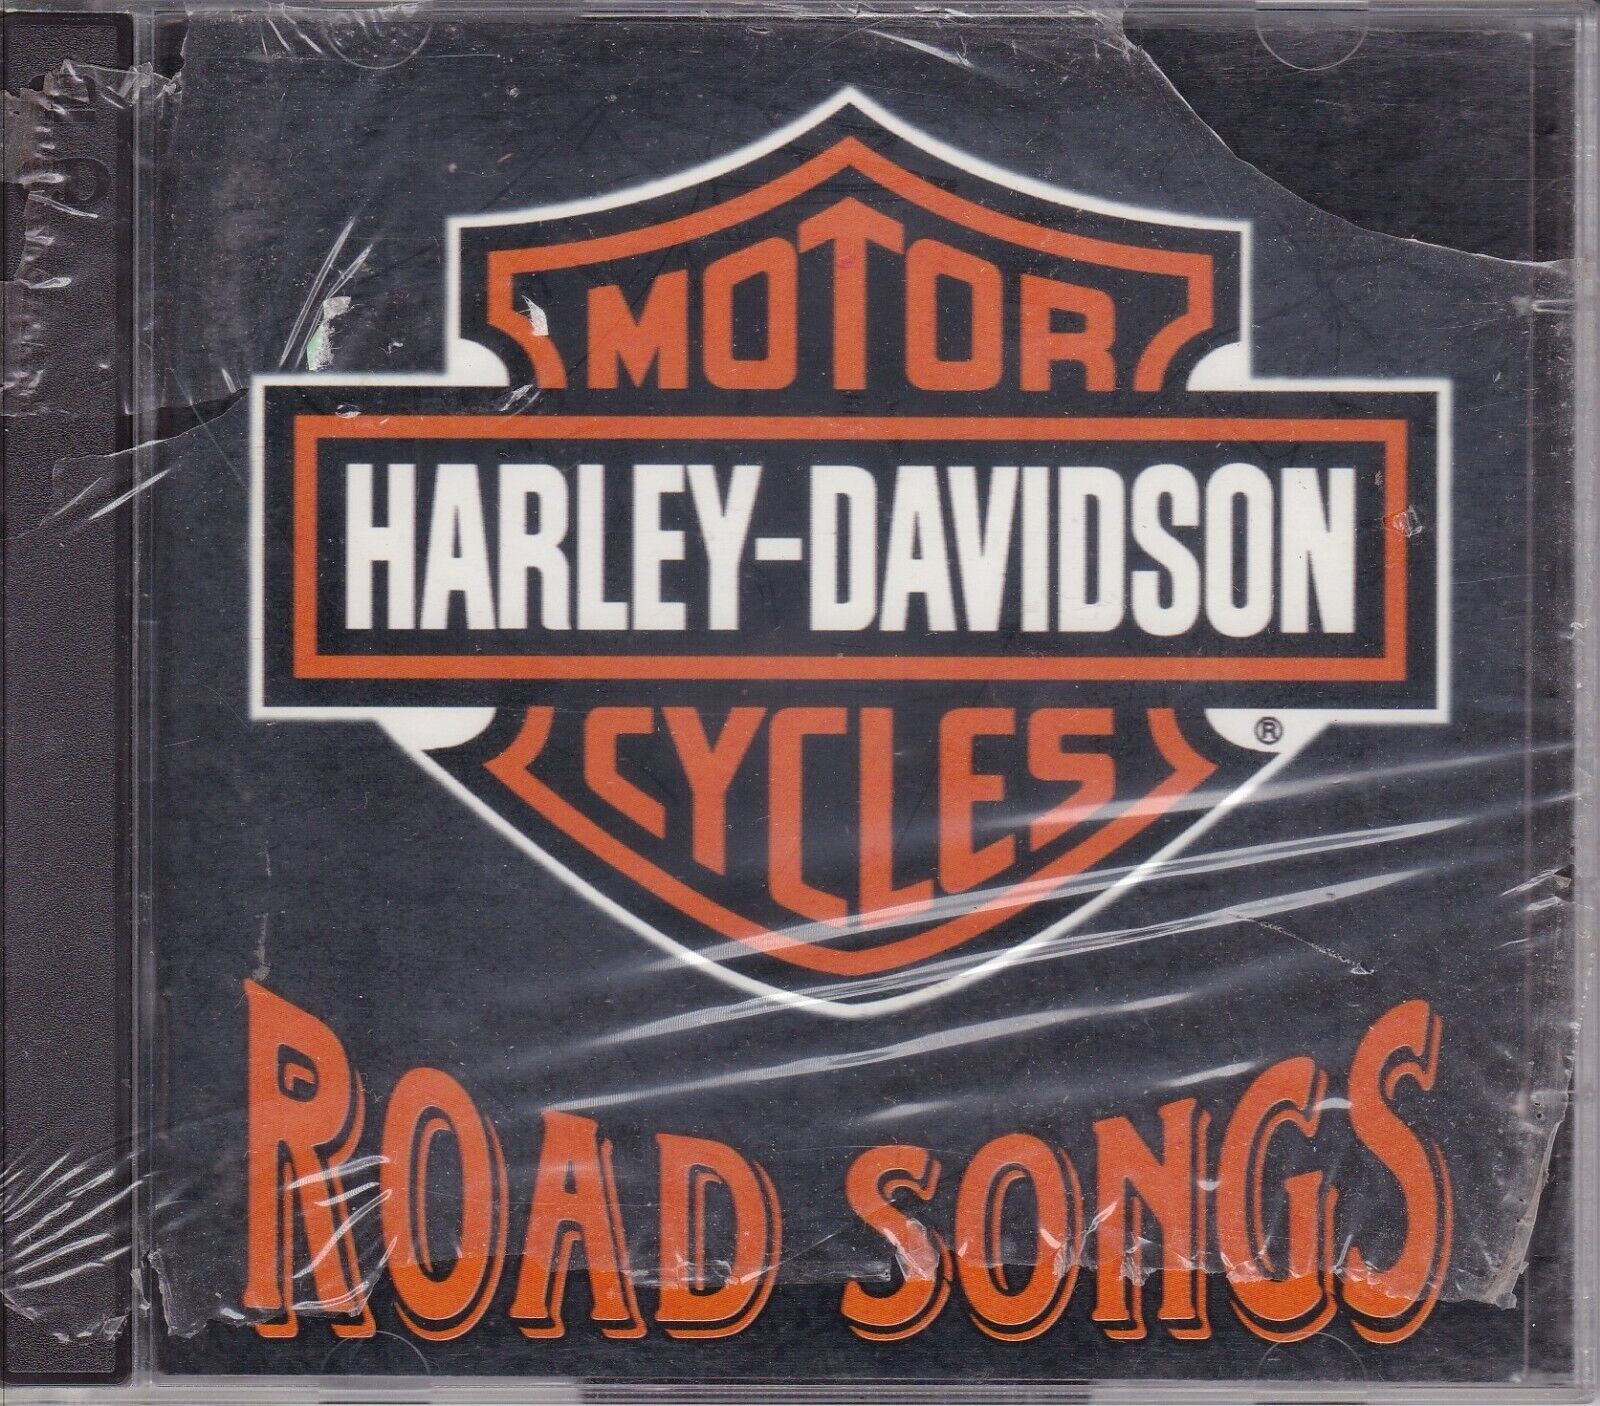 Harley-Davidson Motorcycles - Road Songs by Various Artists (CD, 1994, Capitol)